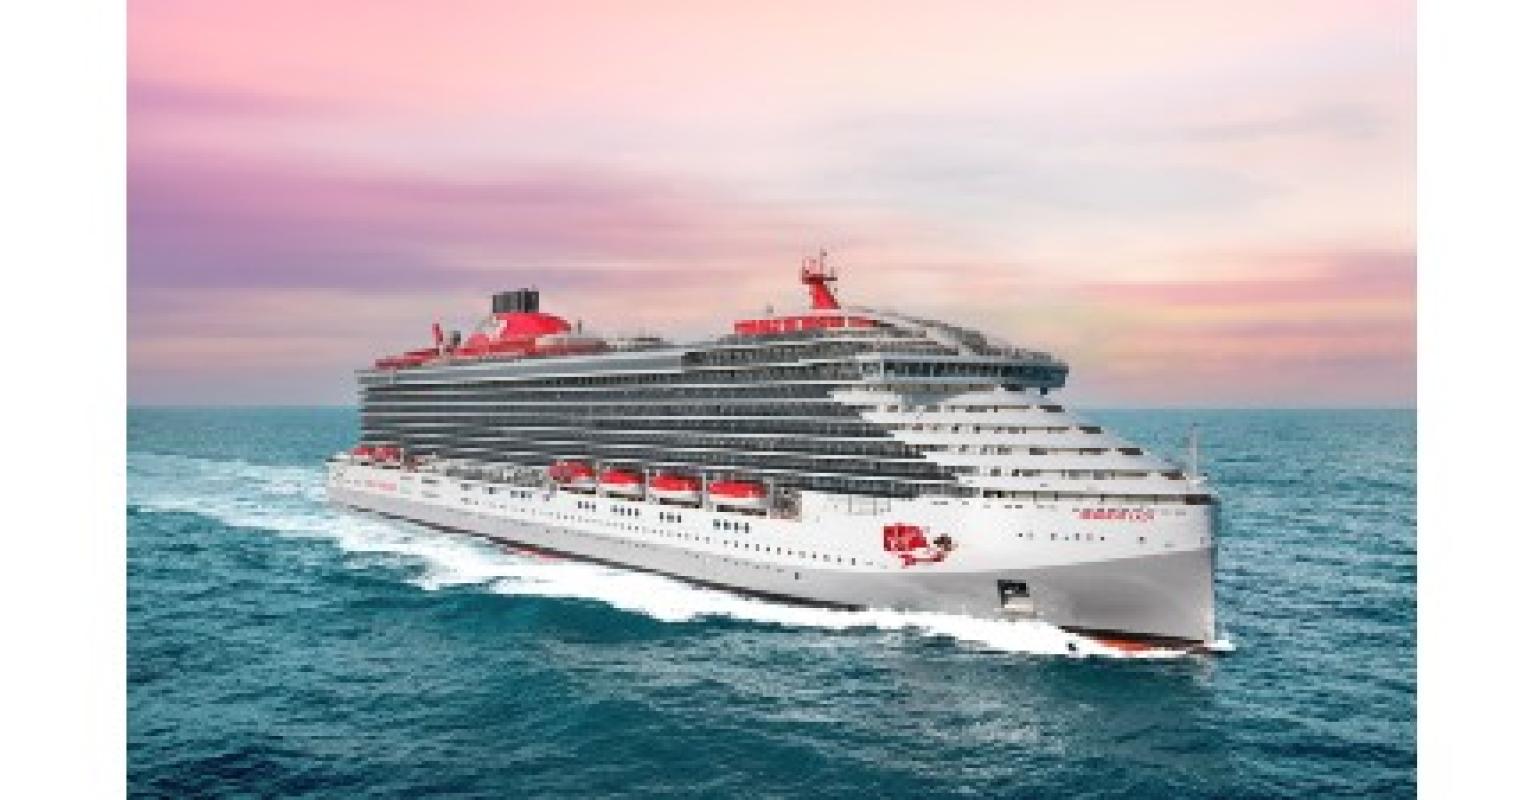 Virgin Voyages takes delivery of Resilient Lady